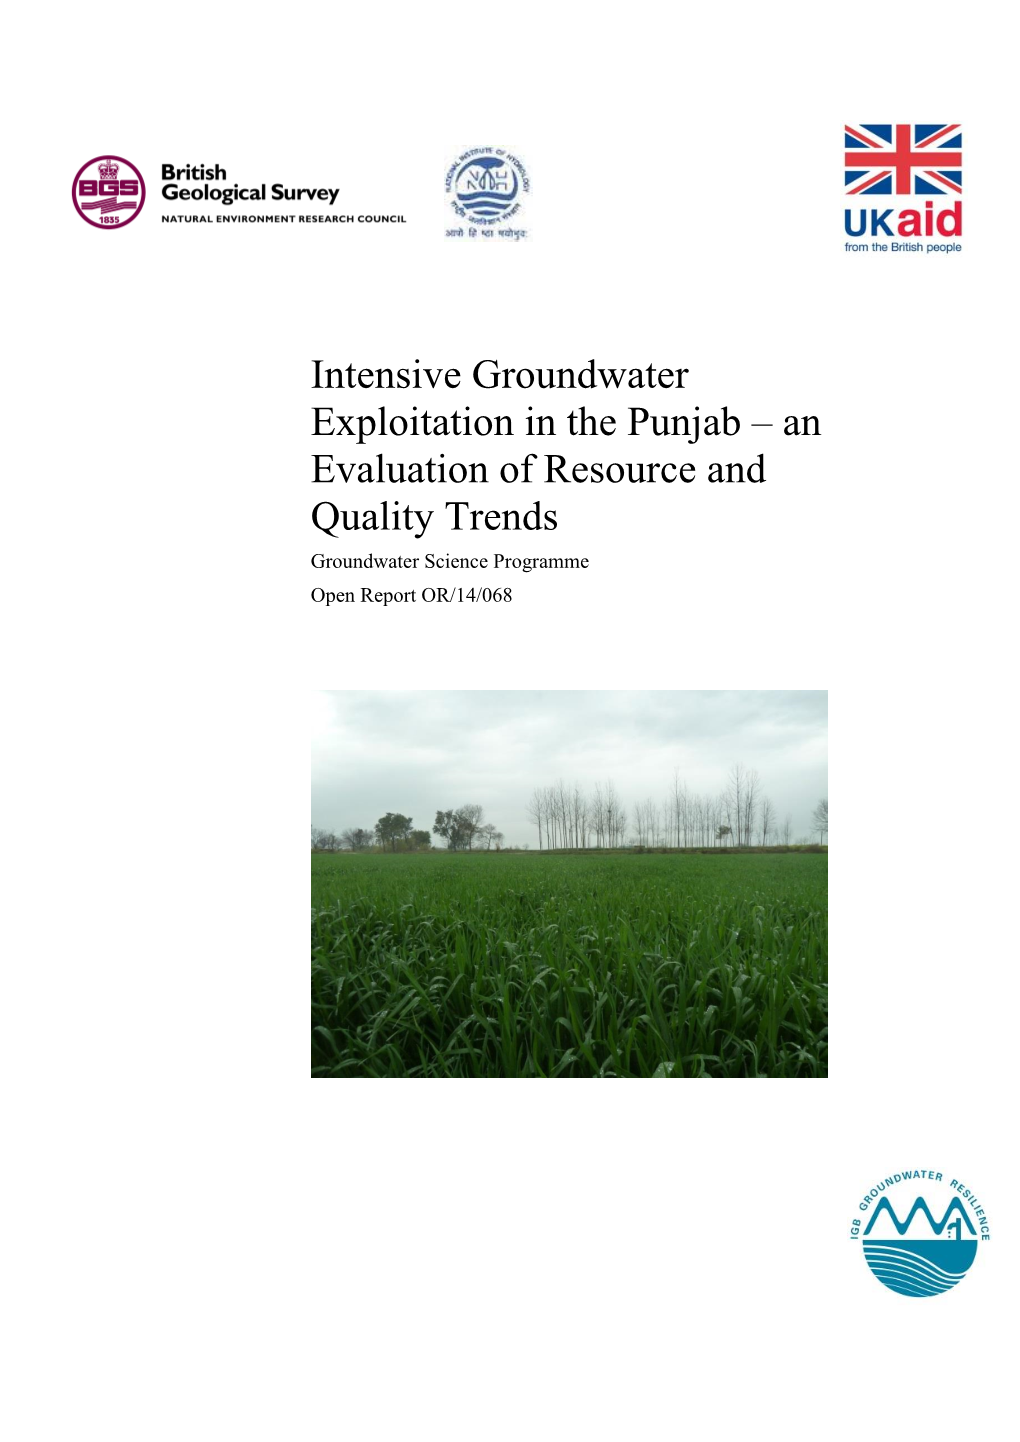 Intensive Groundwater Exploitation in the Punjab: an Evaluation Of